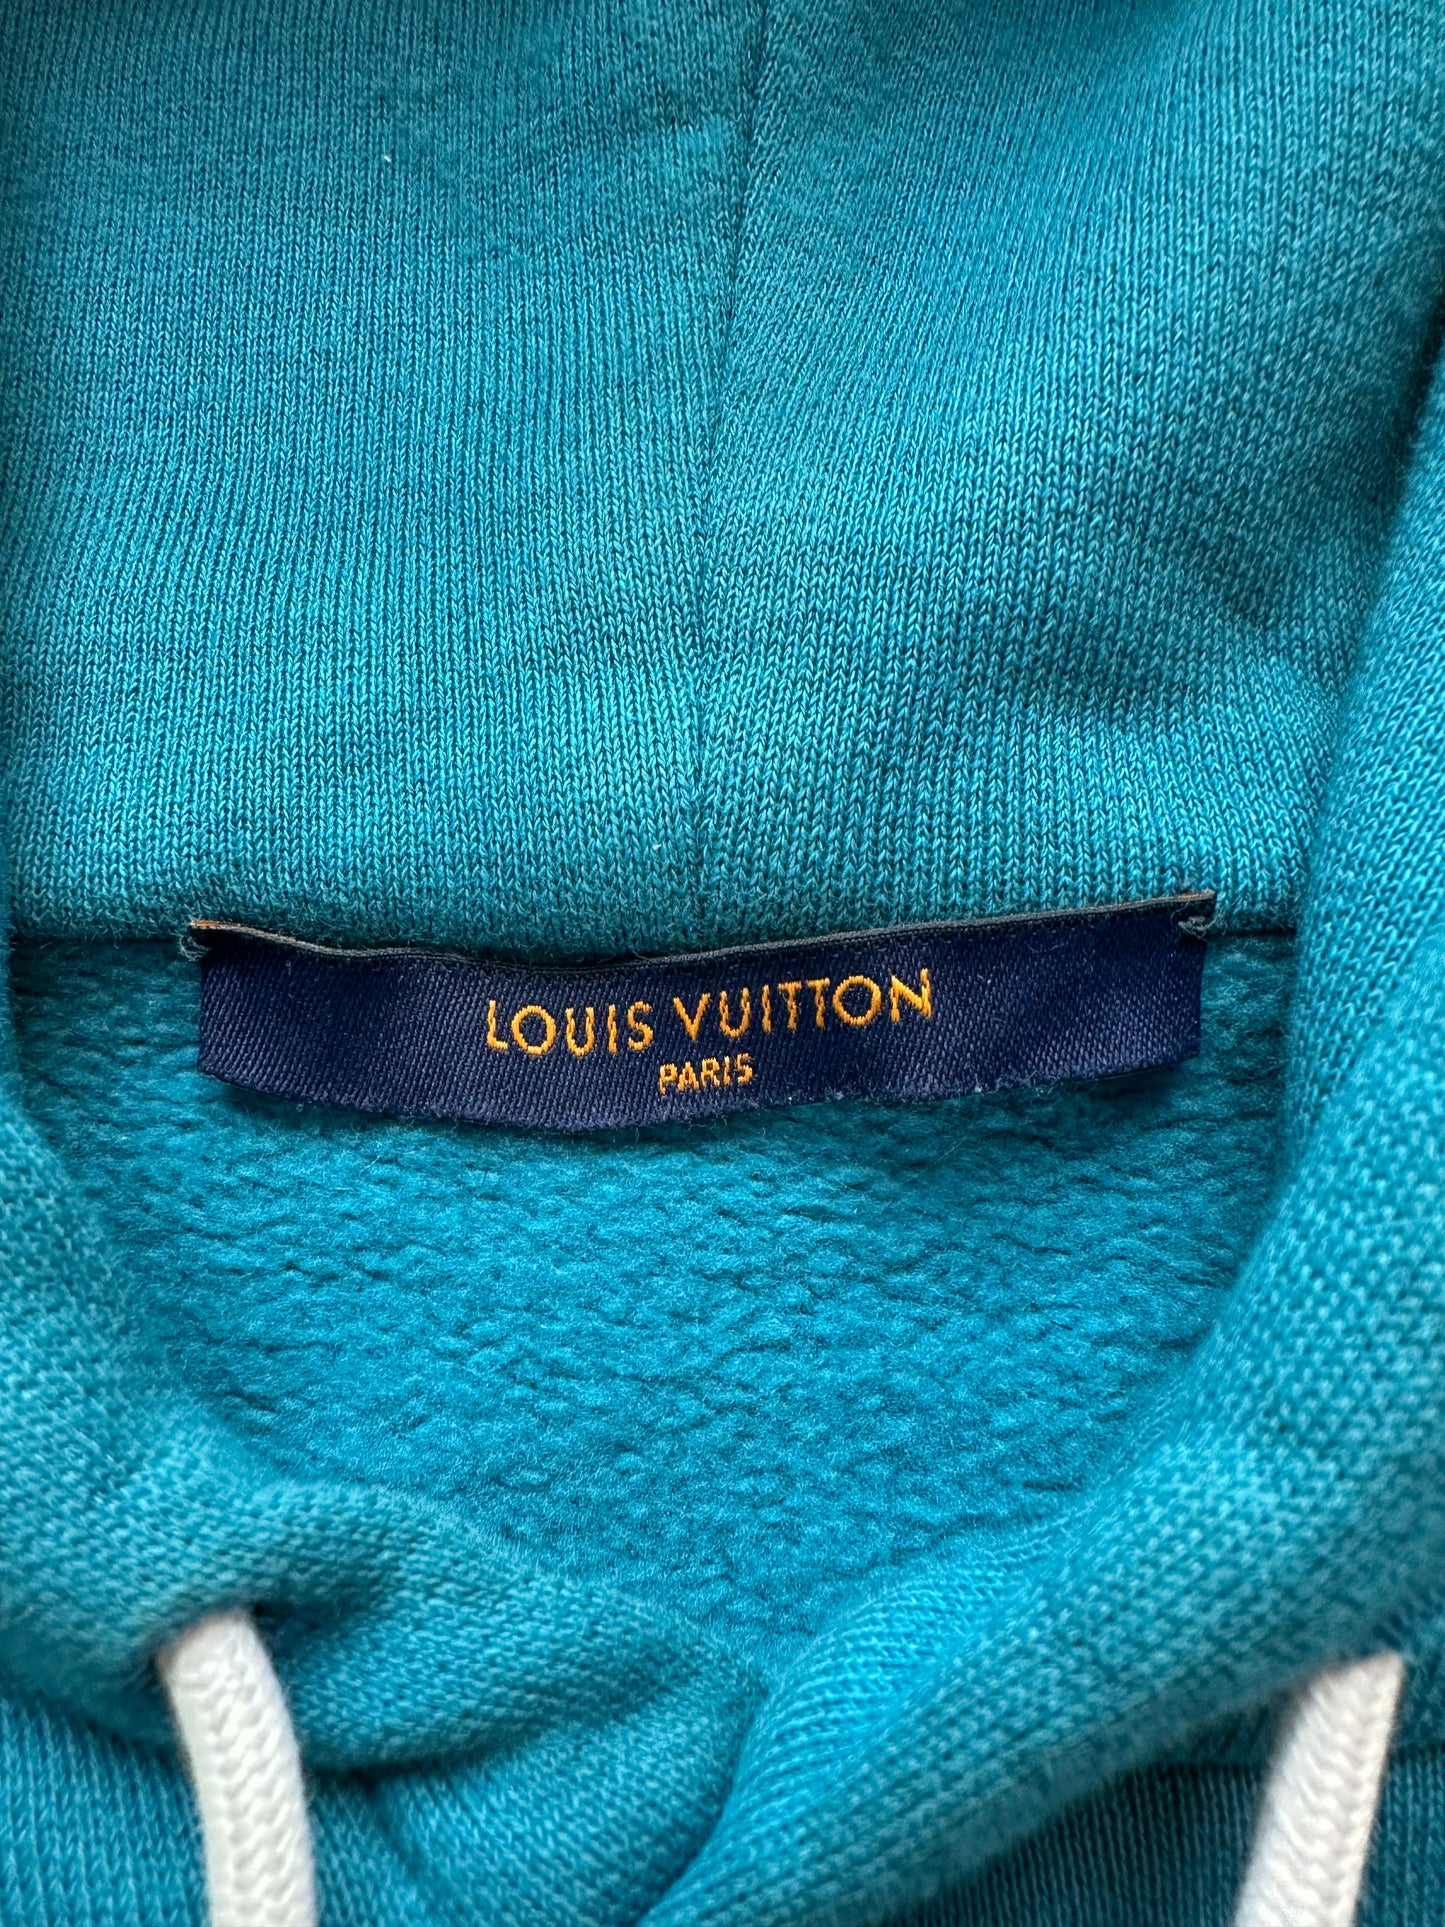 Louis VUITTON Signature Hoodie Embroidered Ocean Blue Size 5L fits